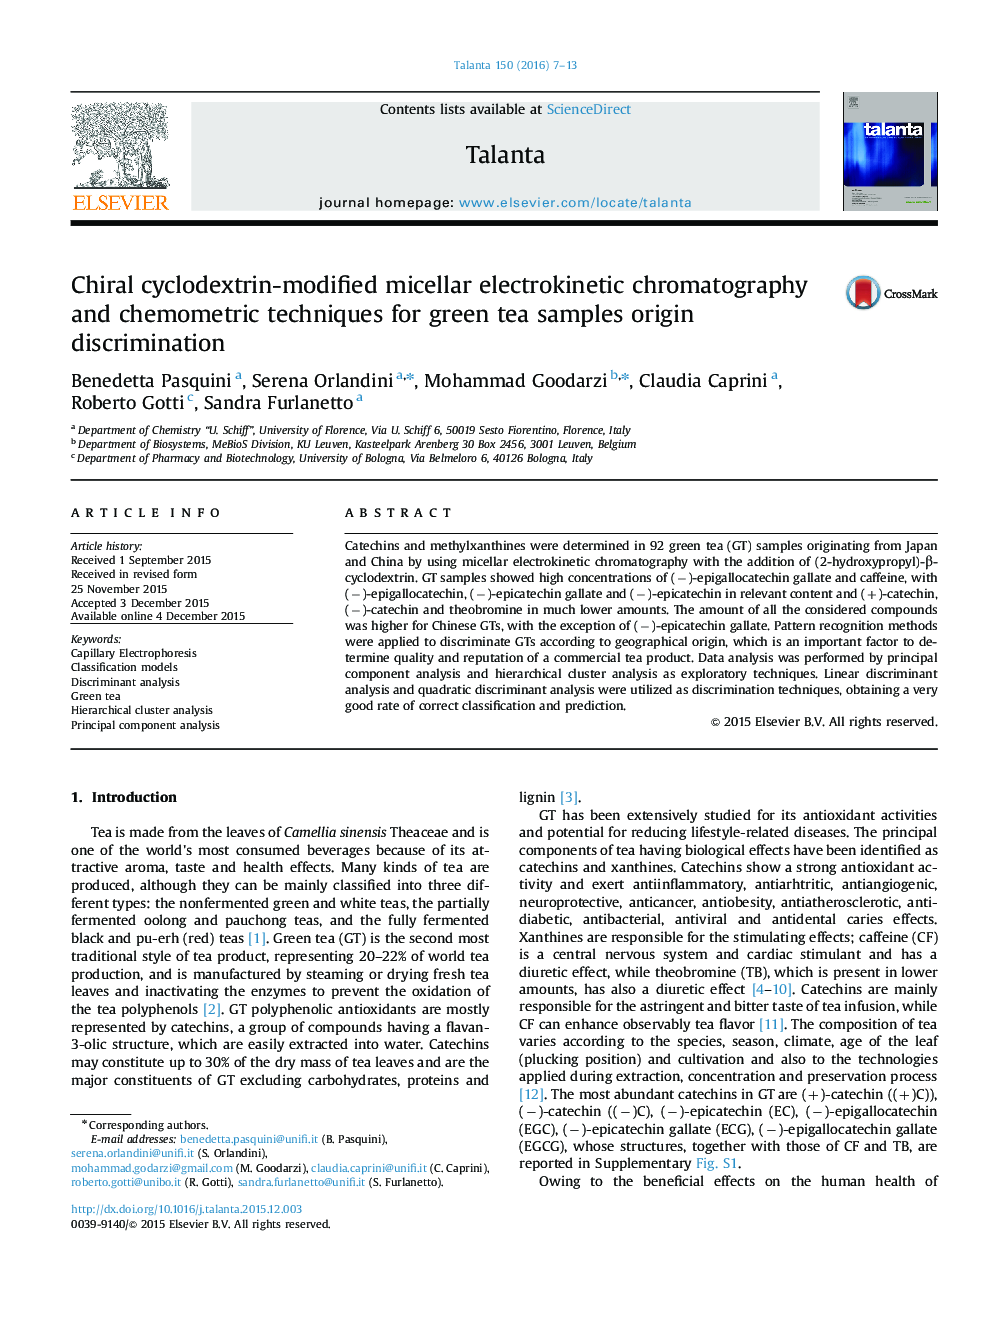 Chiral cyclodextrin-modified micellar electrokinetic chromatography and chemometric techniques for green tea samples origin discrimination